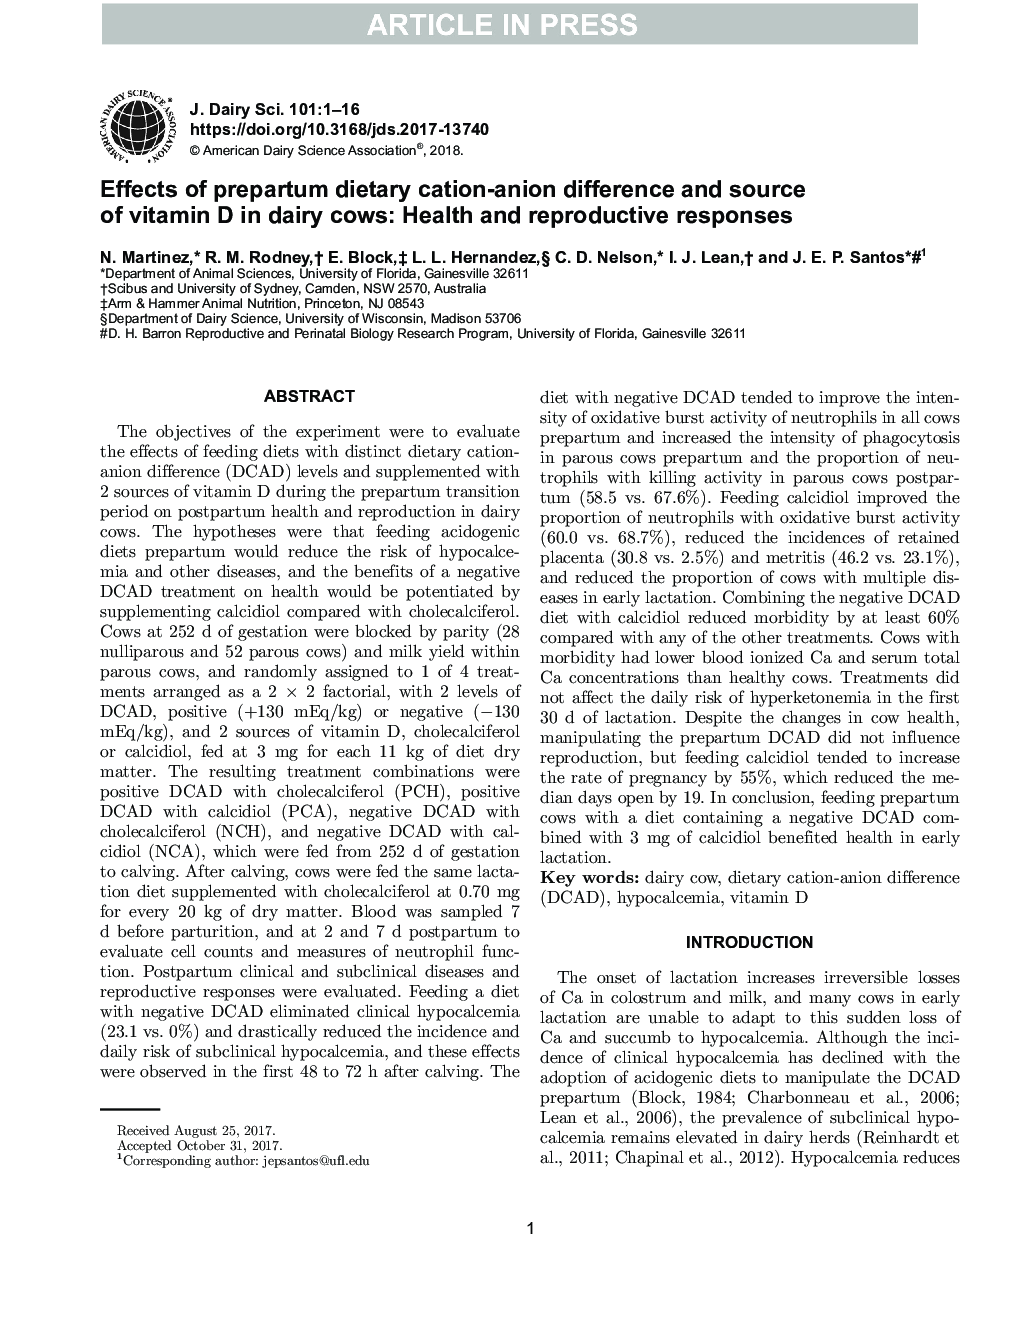 Effects of prepartum dietary cation-anion difference and source of vitamin D in dairy cows: Health and reproductive responses